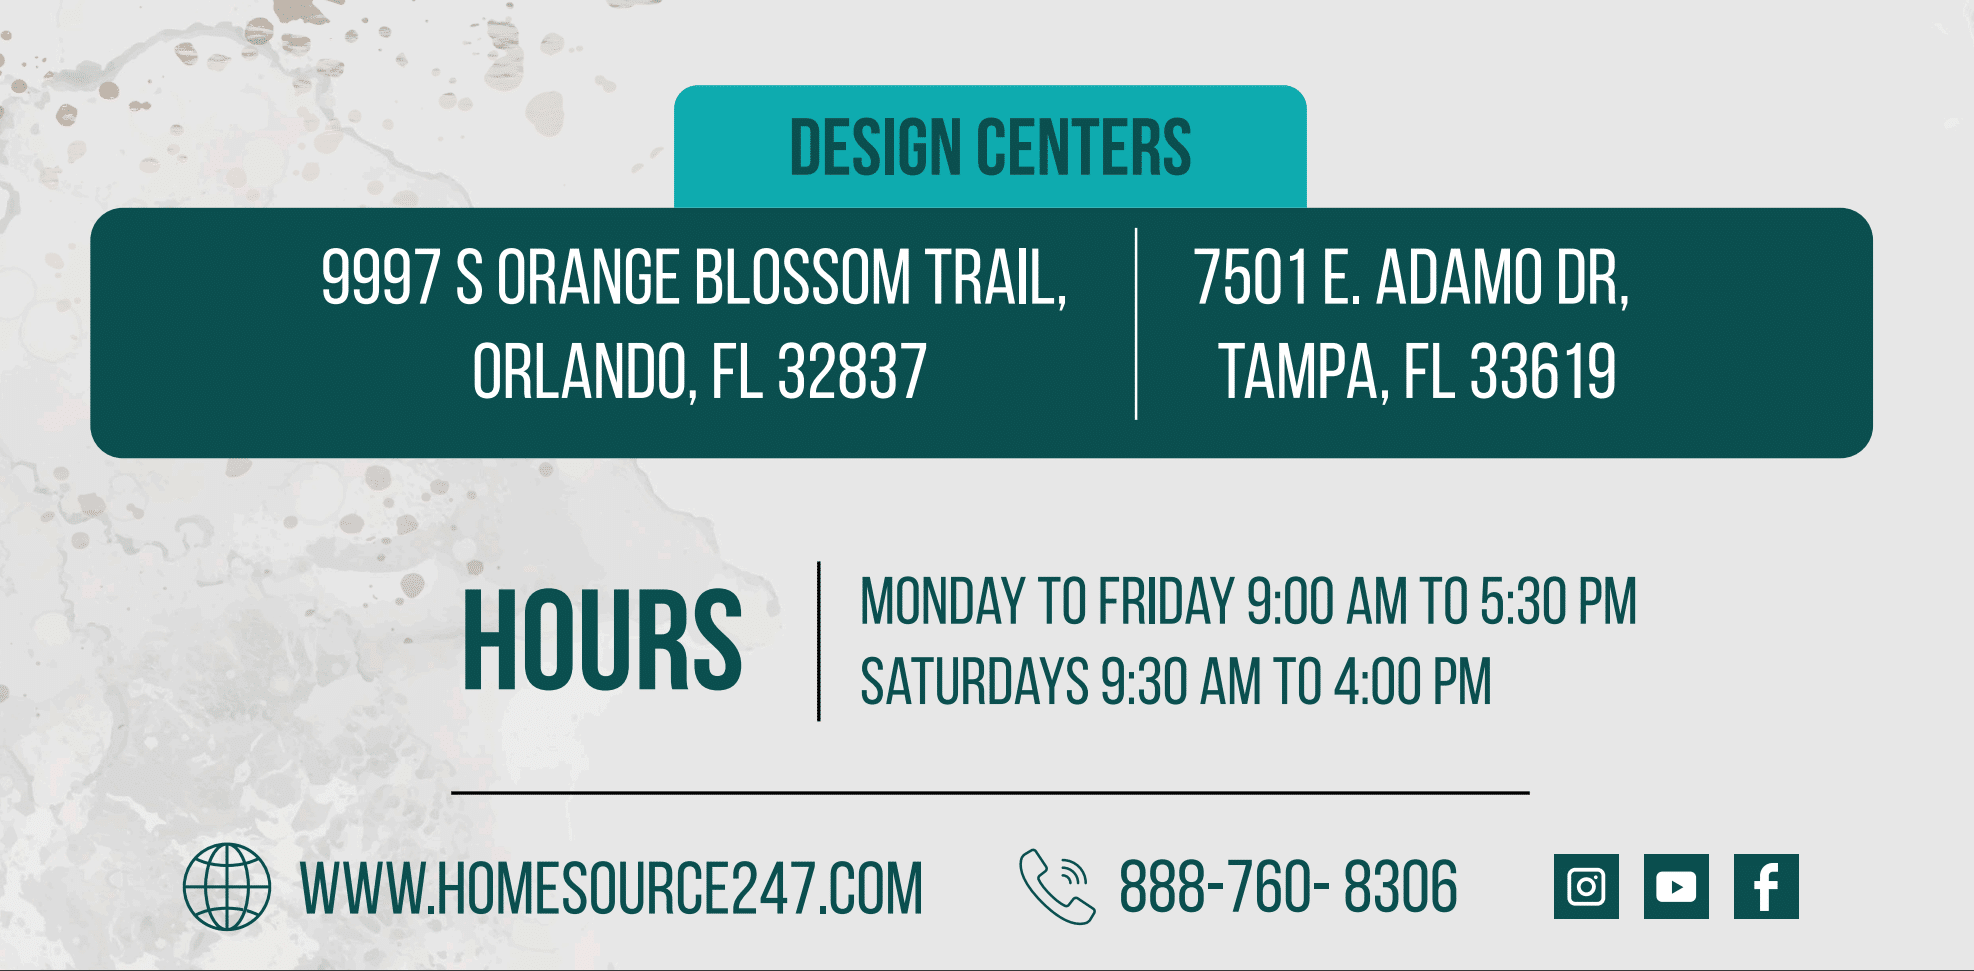 Home Source Design Centers in Orlando and Tampa